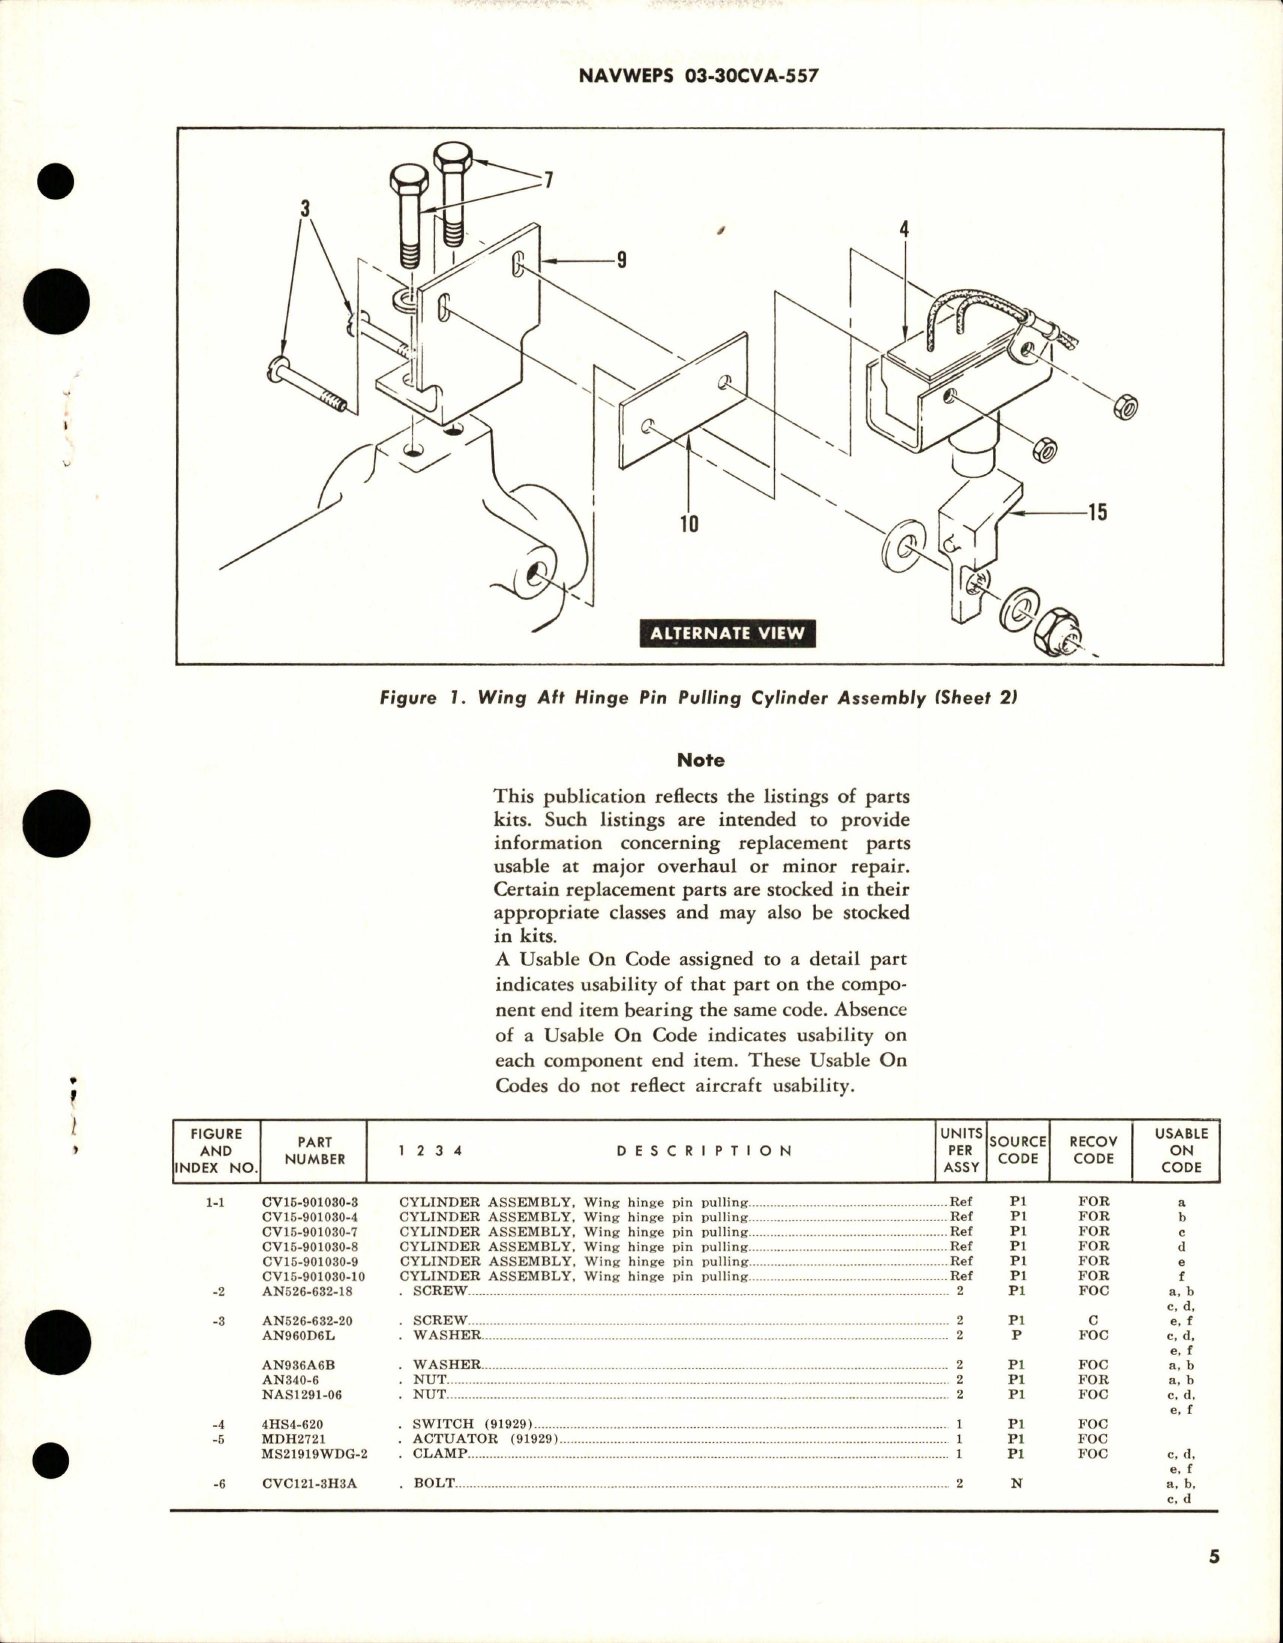 Sample page 5 from AirCorps Library document: Overhaul Instructions with Parts for Wing Aft Hinge Pin Pulling Hydraulic Cylinder